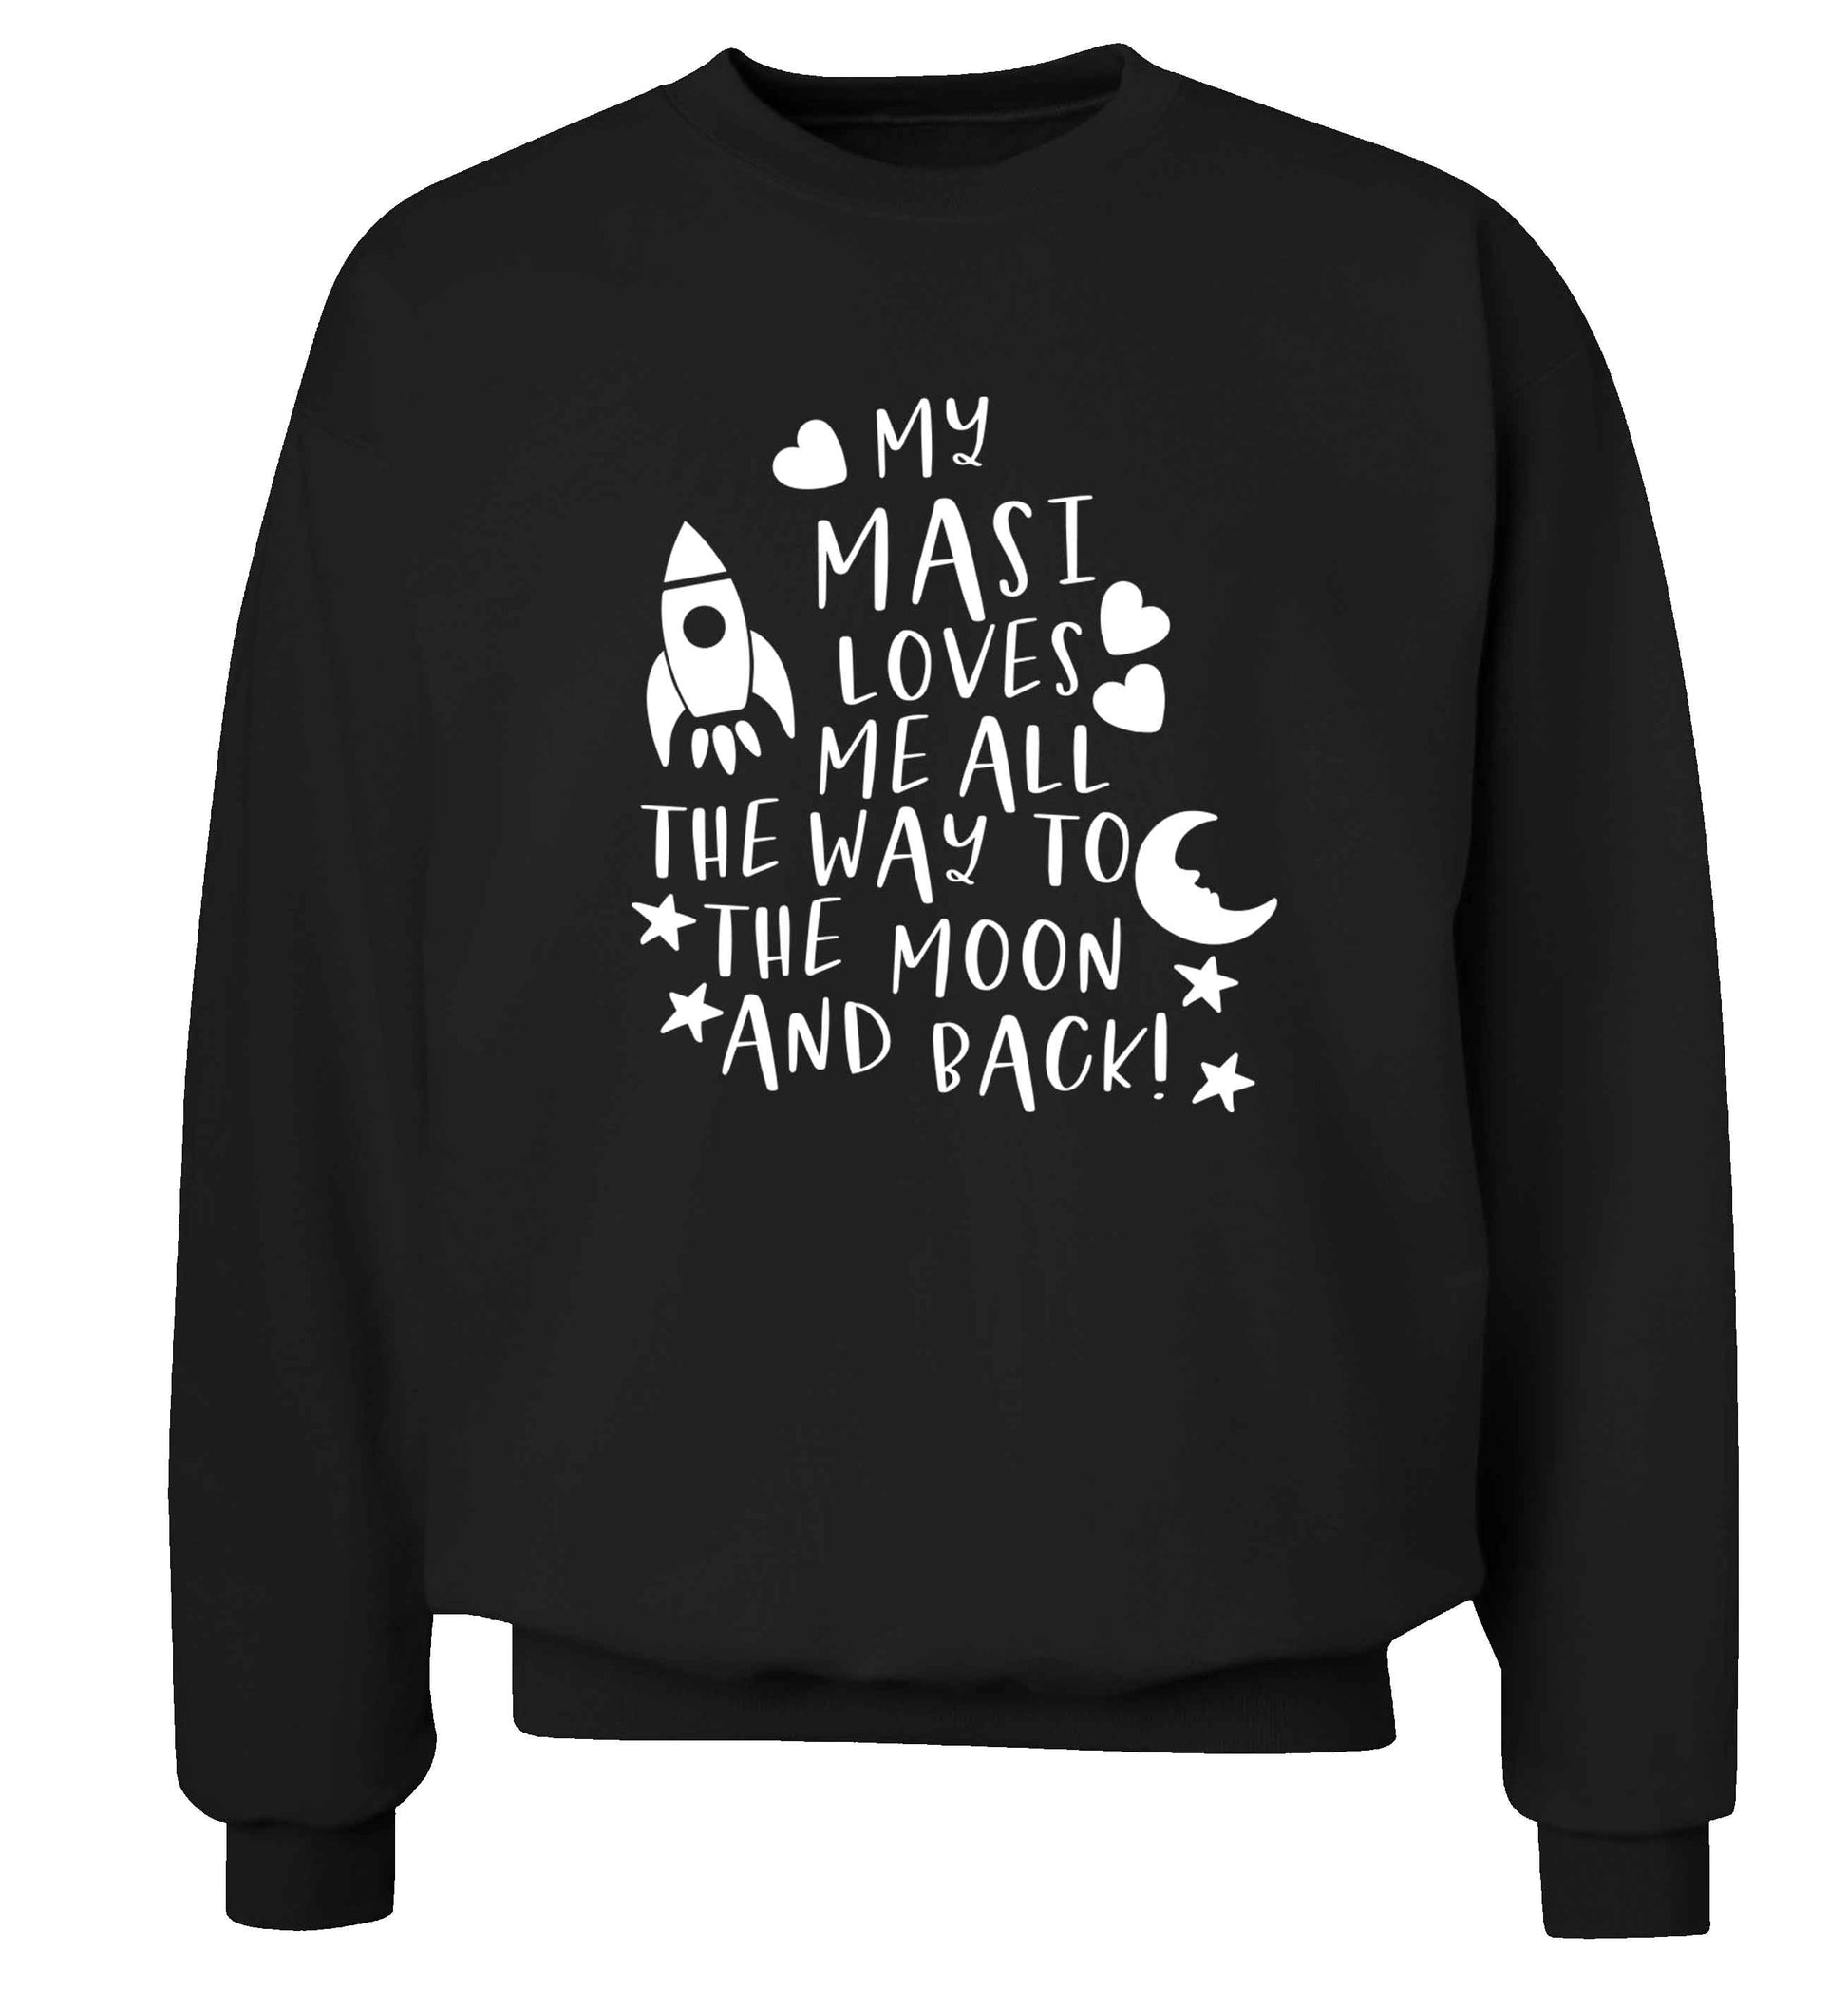 My masi loves me all the way to the moon and back Adult's unisex black Sweater 2XL